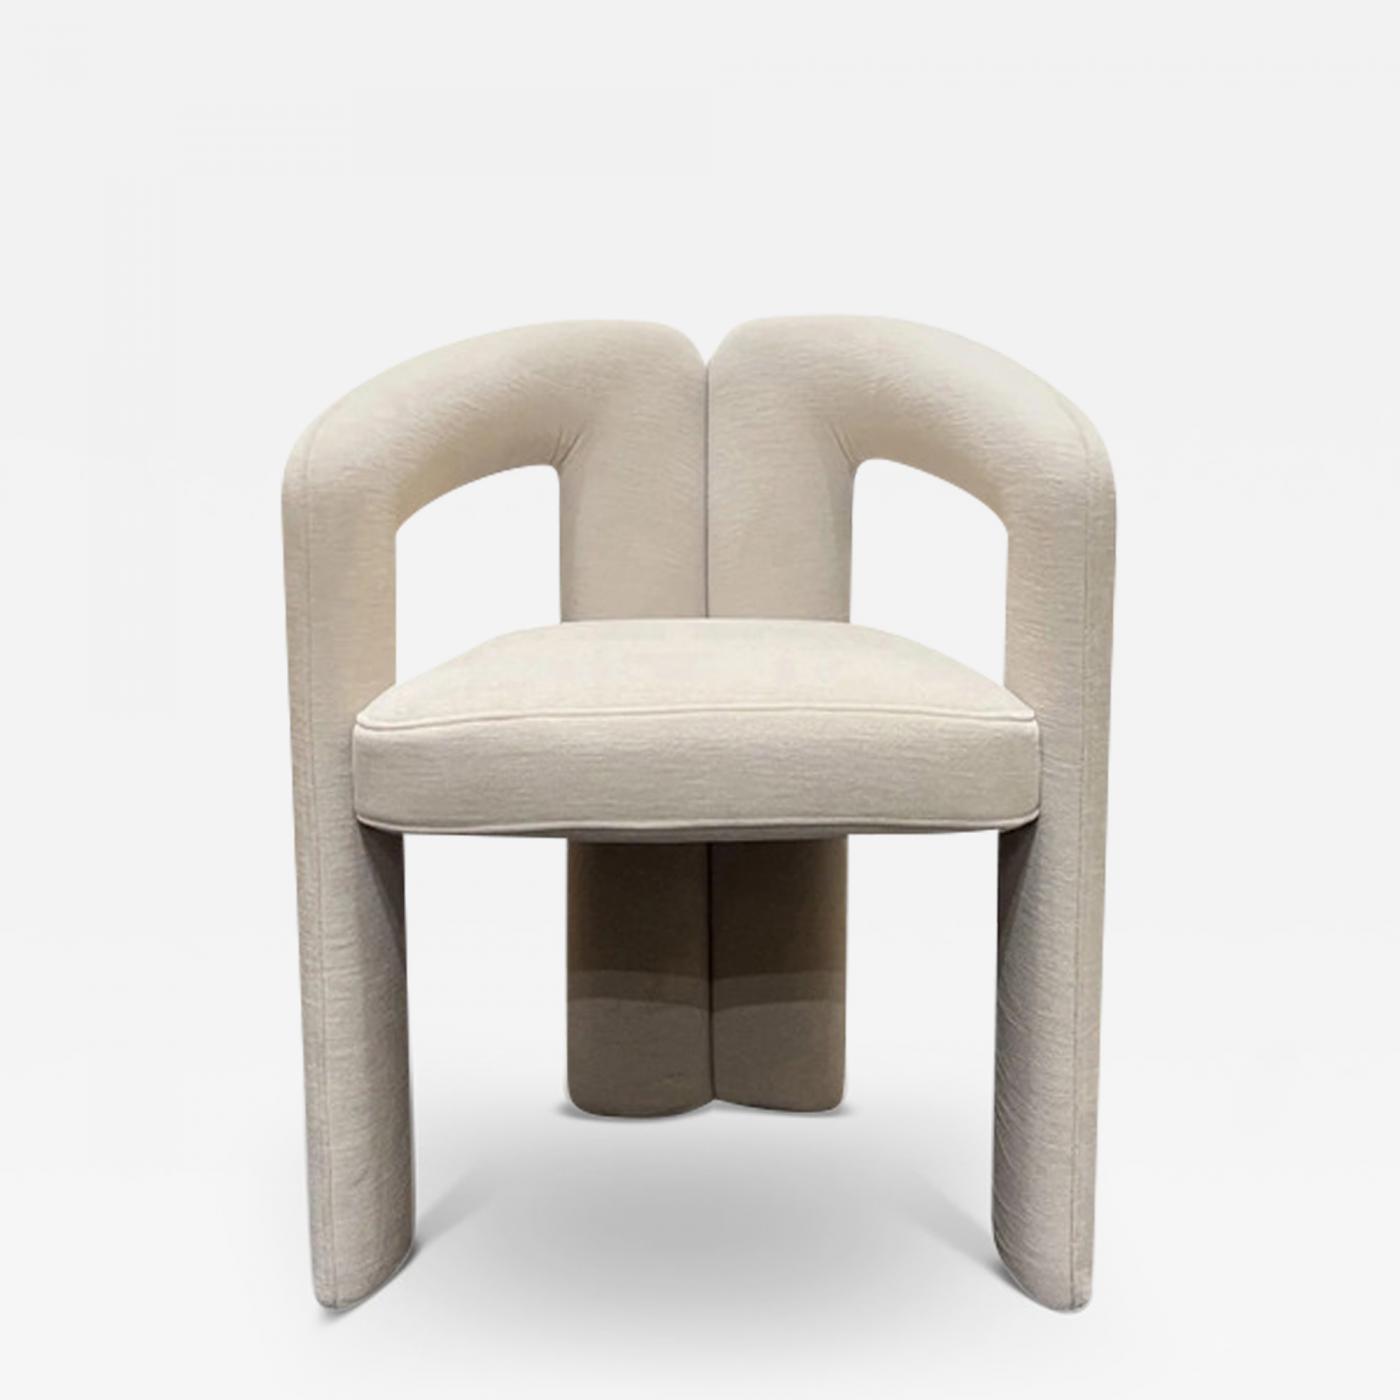 Dudet armchair by Patricia Urquiola for Cassina